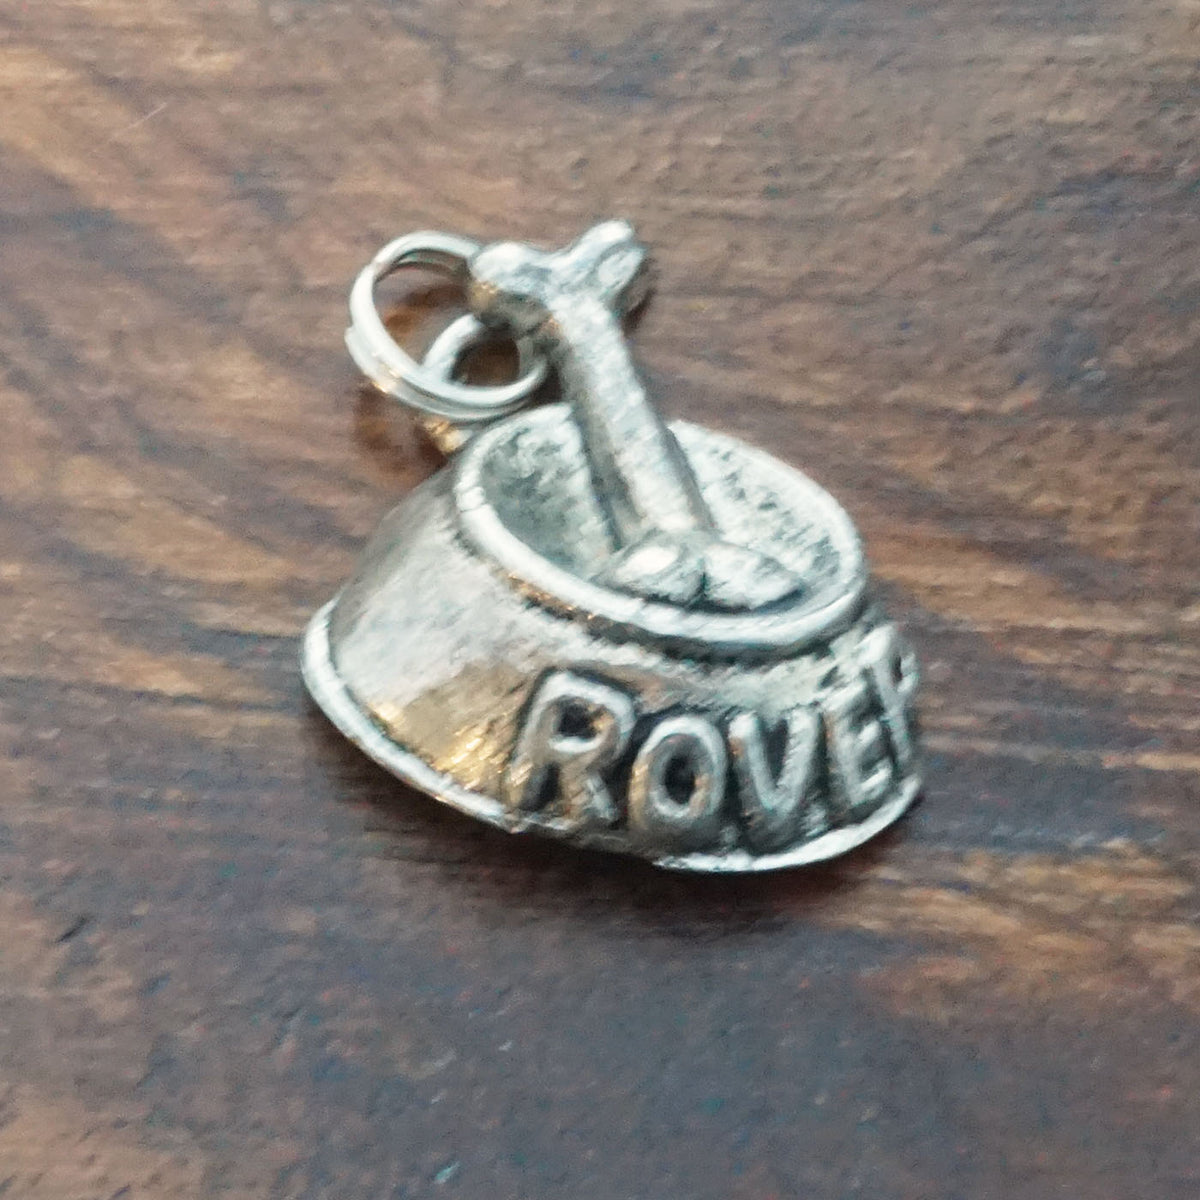 Rover (Dog Dish) - Silver Charms